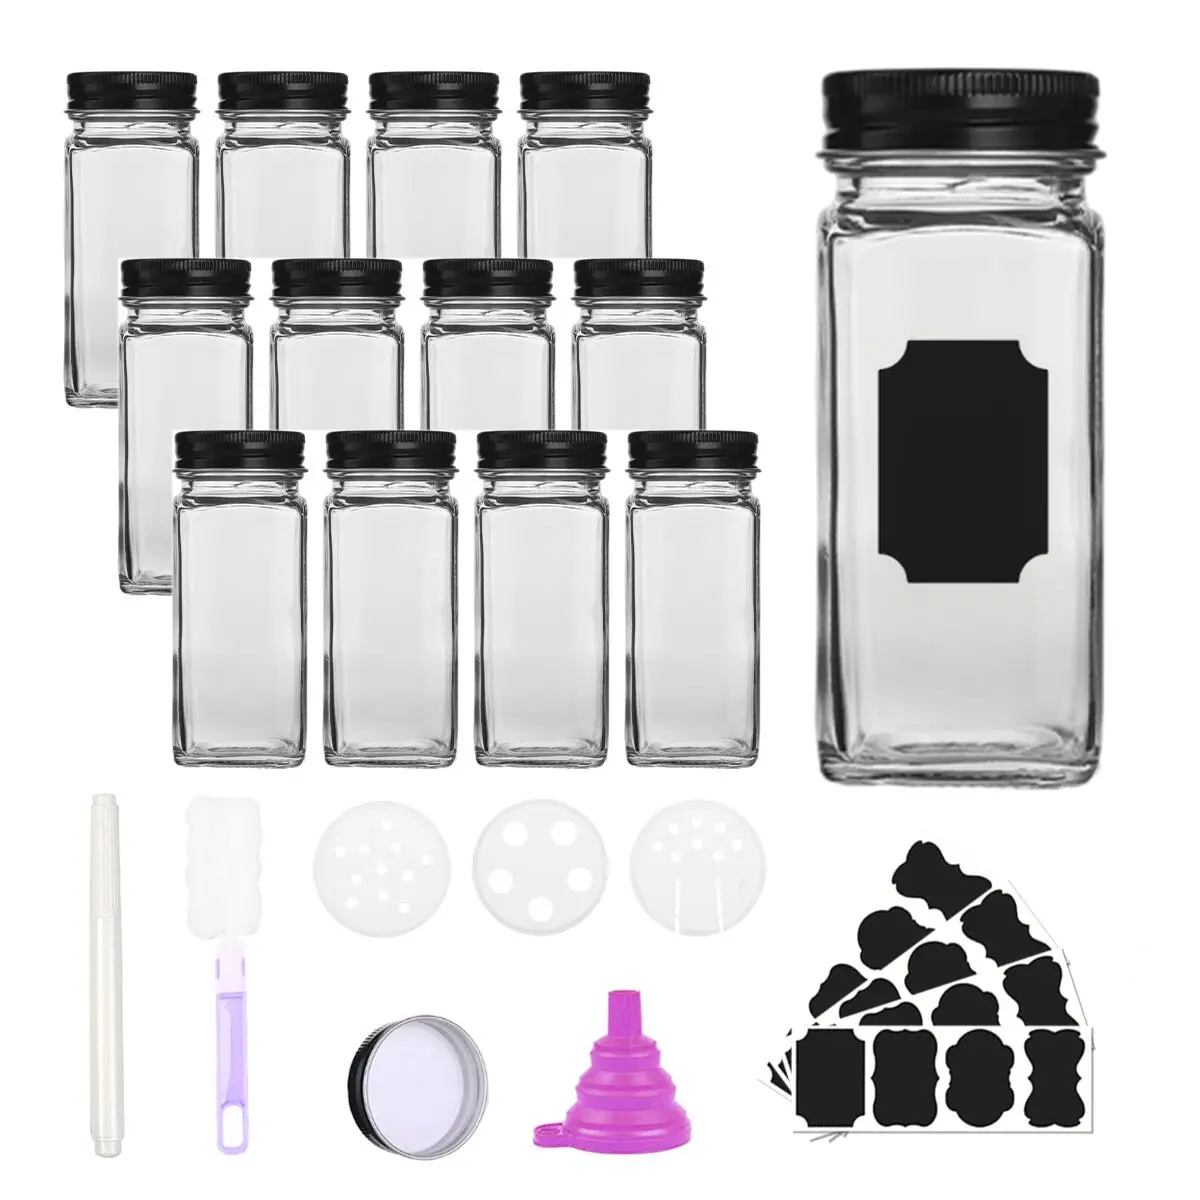 48 Pack 4 oz 120 ml Clear Glass Spice & Salts Jars Bottles, Square Glass Seasoning  Jars With Aluminum Silver Metal Caps and Pour/Sift Shaker Lid. 1 Pen,80  Black Labels and 1